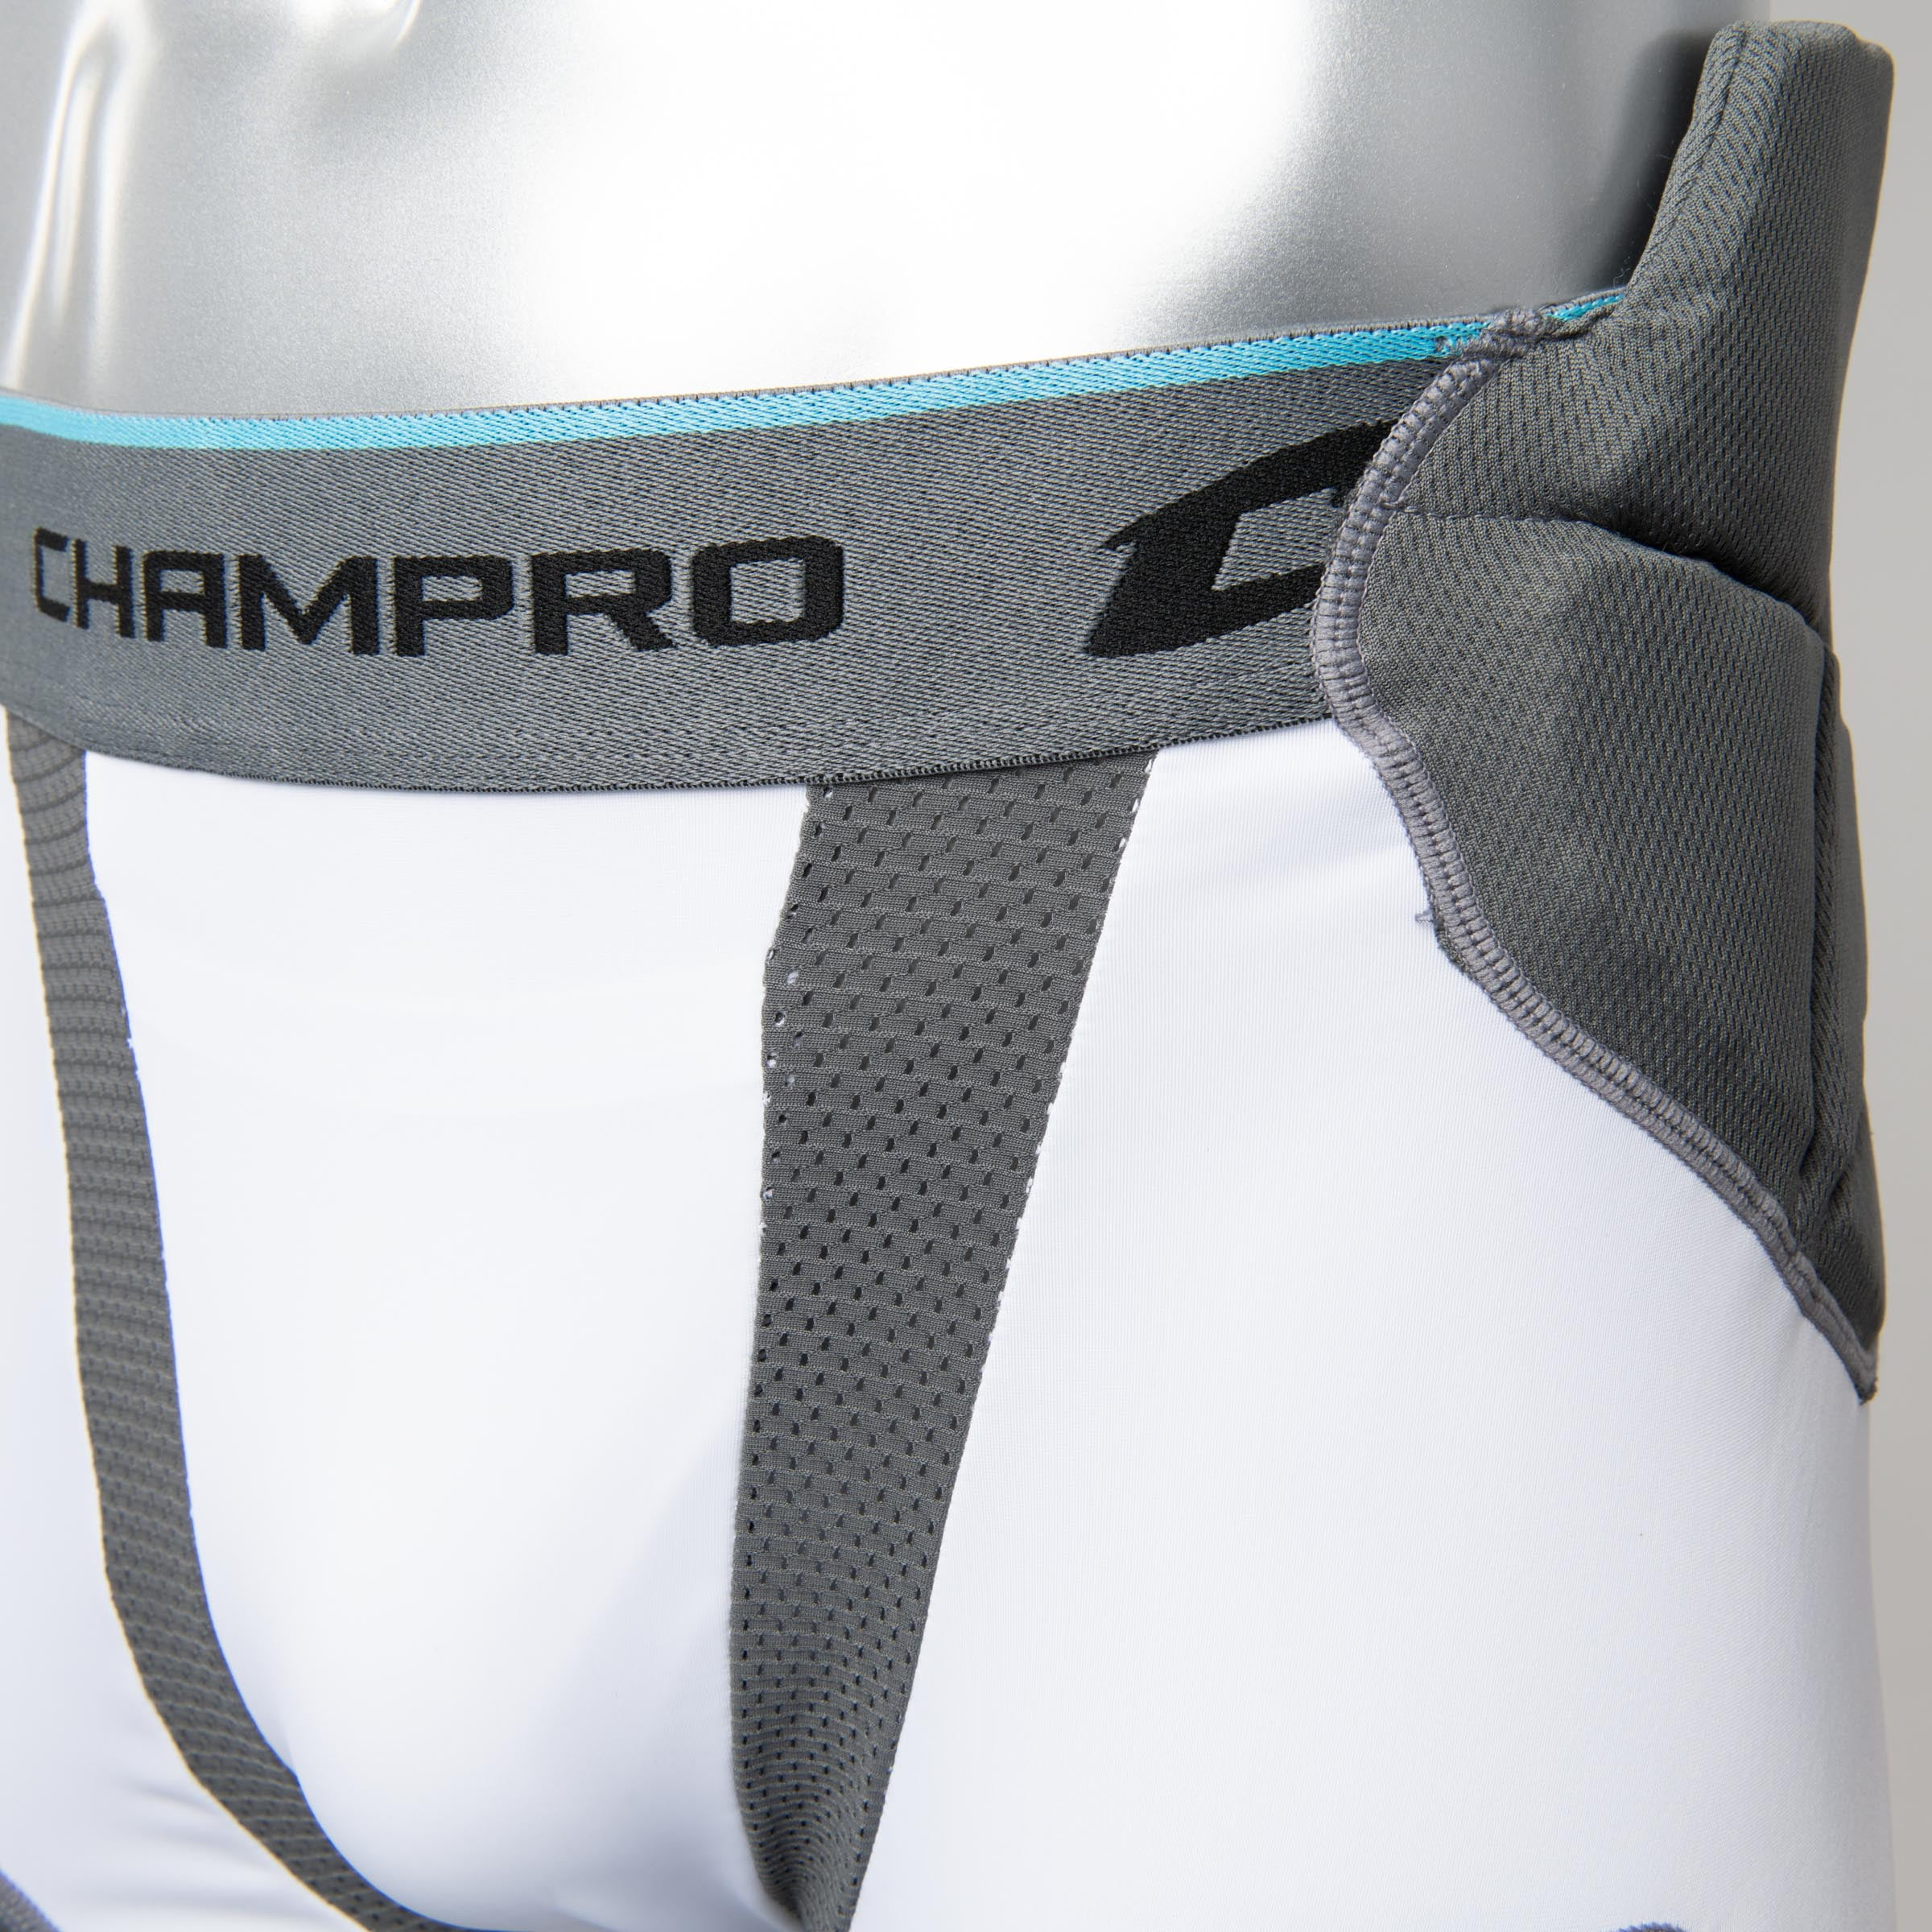 CHAMPRO Man Up 7-Pad Football Girdle, Compression Fit, Youth & Adult Sizes